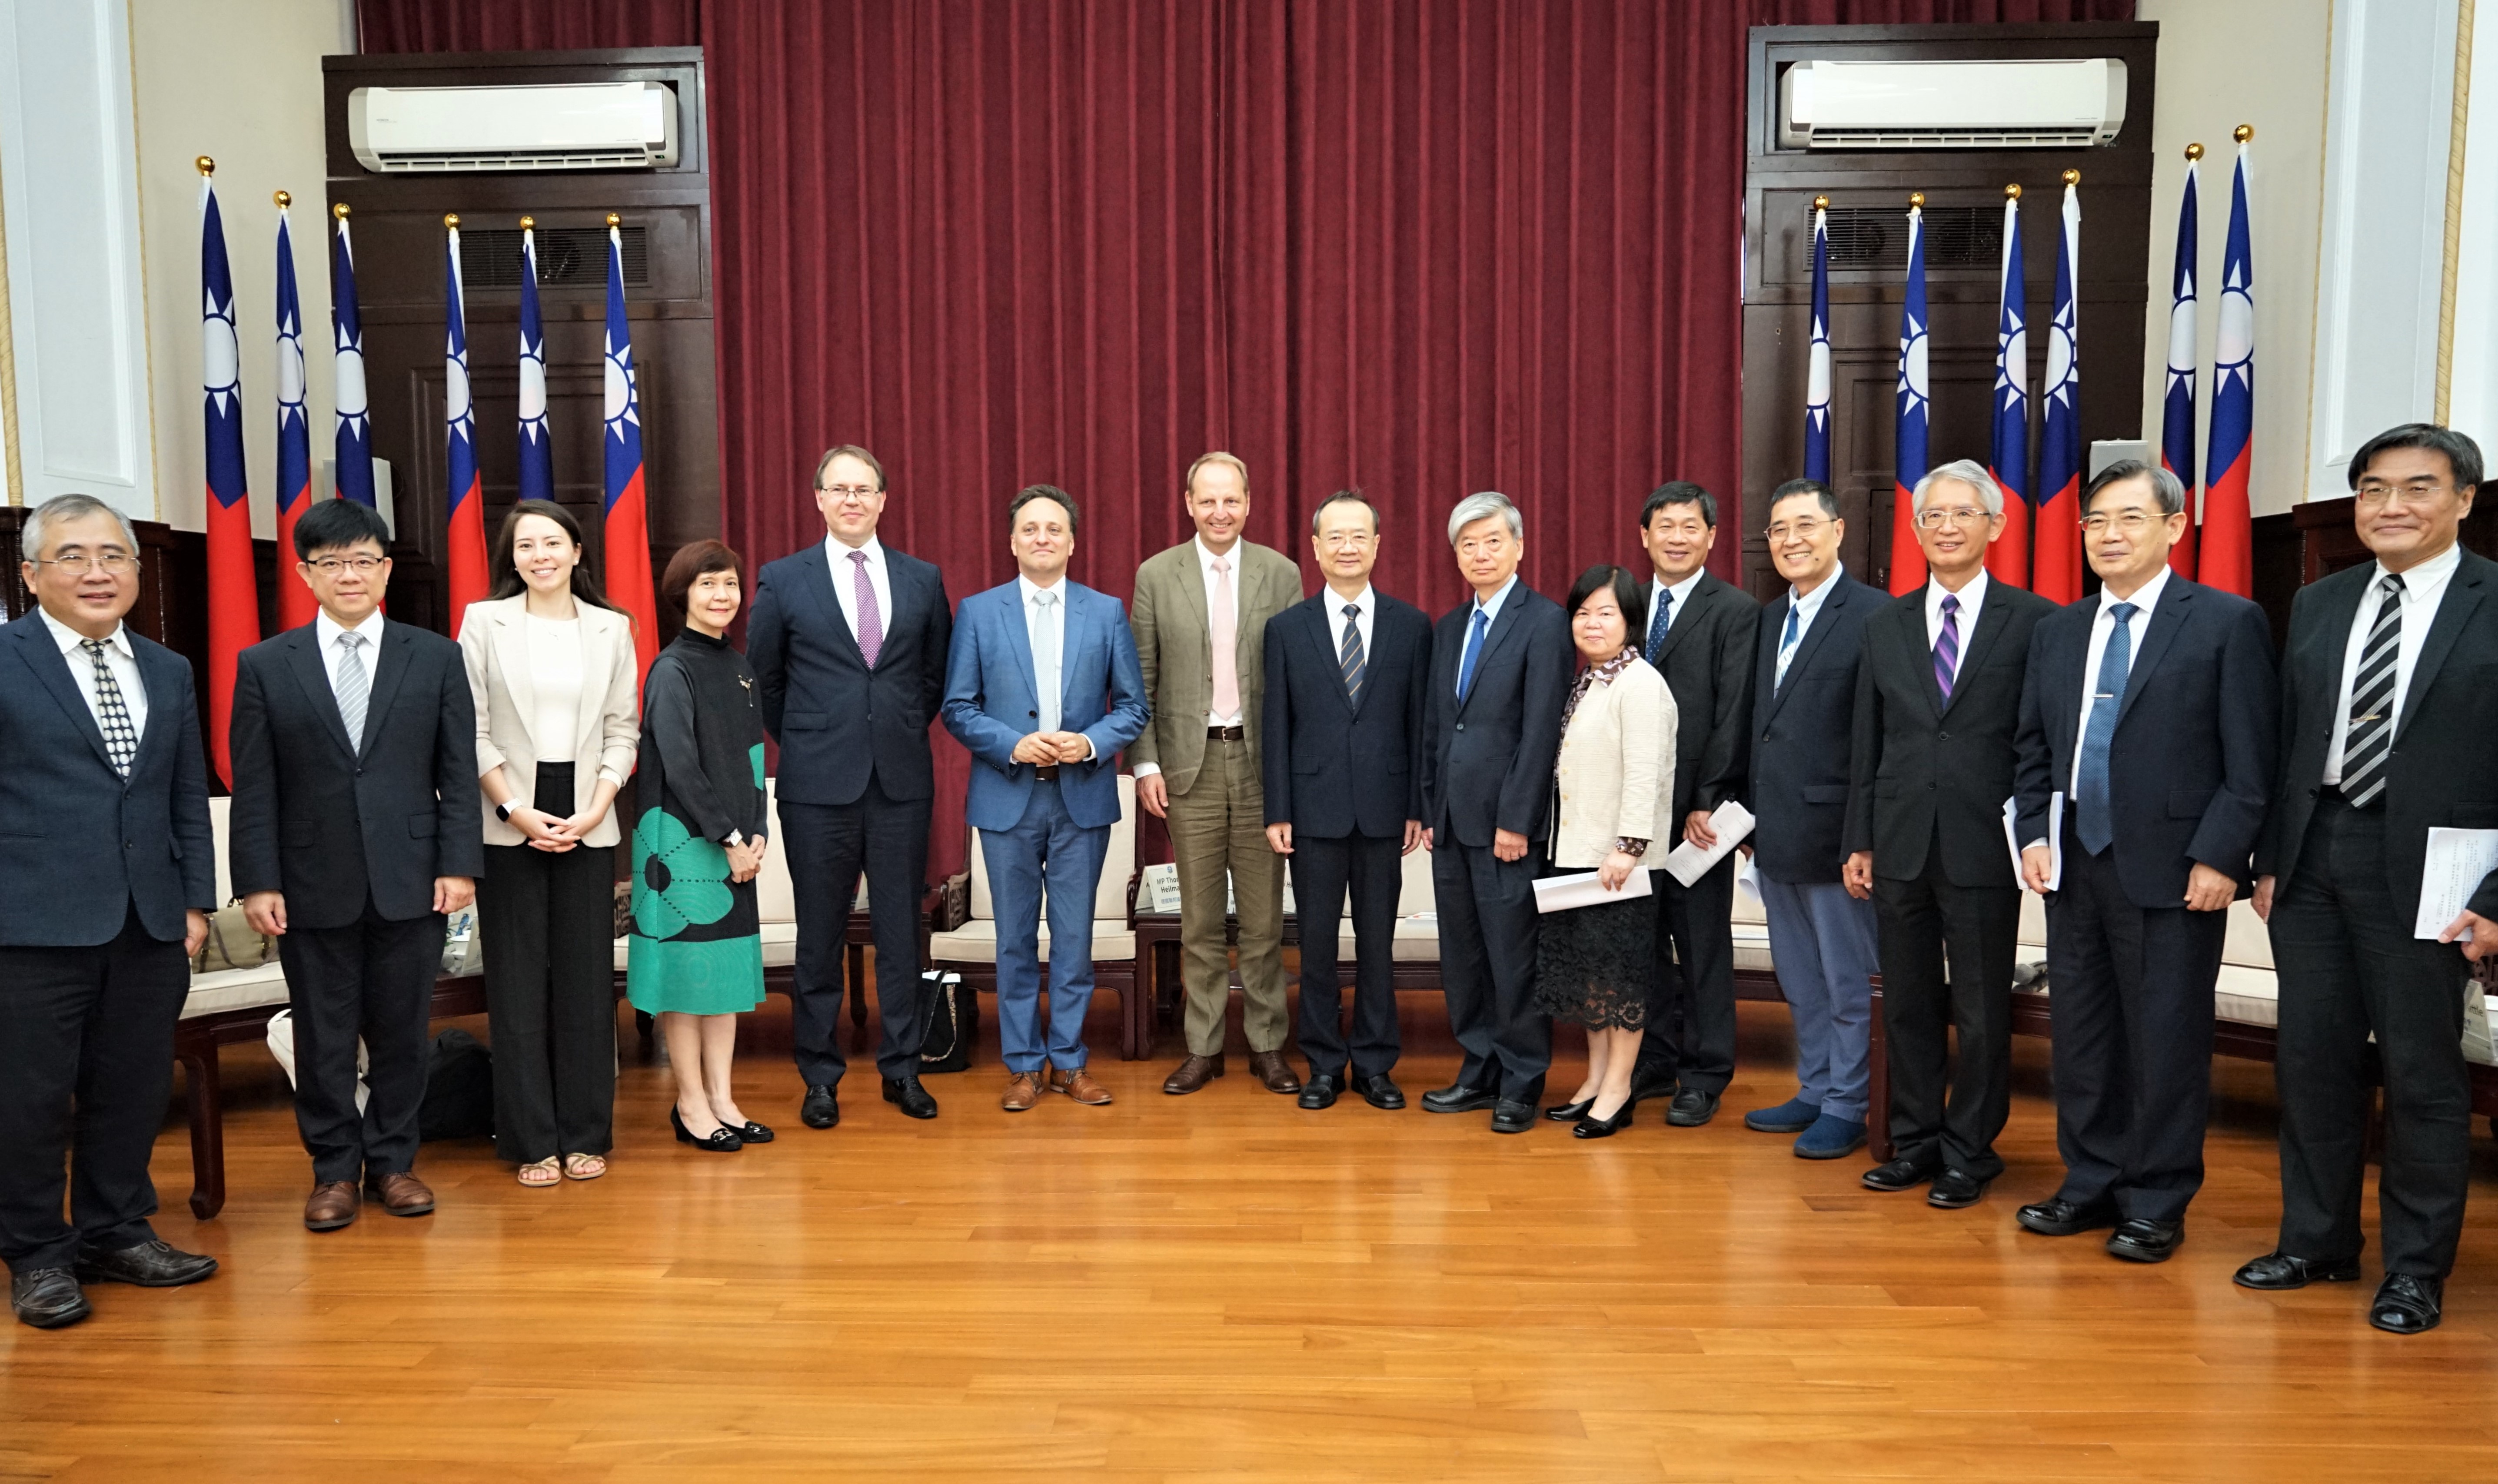 Photo description: The visit of the delegation led by German MP Thomas Heilmann. From left to right: Director-General Wu-Chi LAI of the Department of Information Technology , Director-General Chen-Chou HSU of the Taiwan Constitutional Court, Ms. Olivia Schlouch, Ms. Susan Chan, Director Stefan Samse of the Konrad-Adenauer-Stiftung (KAS) Rule of Law Programme Asia, Former State Government Commissioner & CIO Mr. Ammar Alkassar, MP Thomas Heilmann, President of the Judicial Yuan & Chief Justice Dr. Tzong-Li HSU, Vice President Jeong-Duen TSAI of the Judicial Yuan, Justice Horng-Shya HUANG, Justice Jui-Ming HUANG, Justice Sheng-Lin JAN, Justice Ming-Yan SHIEH, Secretary-General San-Long WU, Deputy Secretary-General Lin-Lun HUANG. 